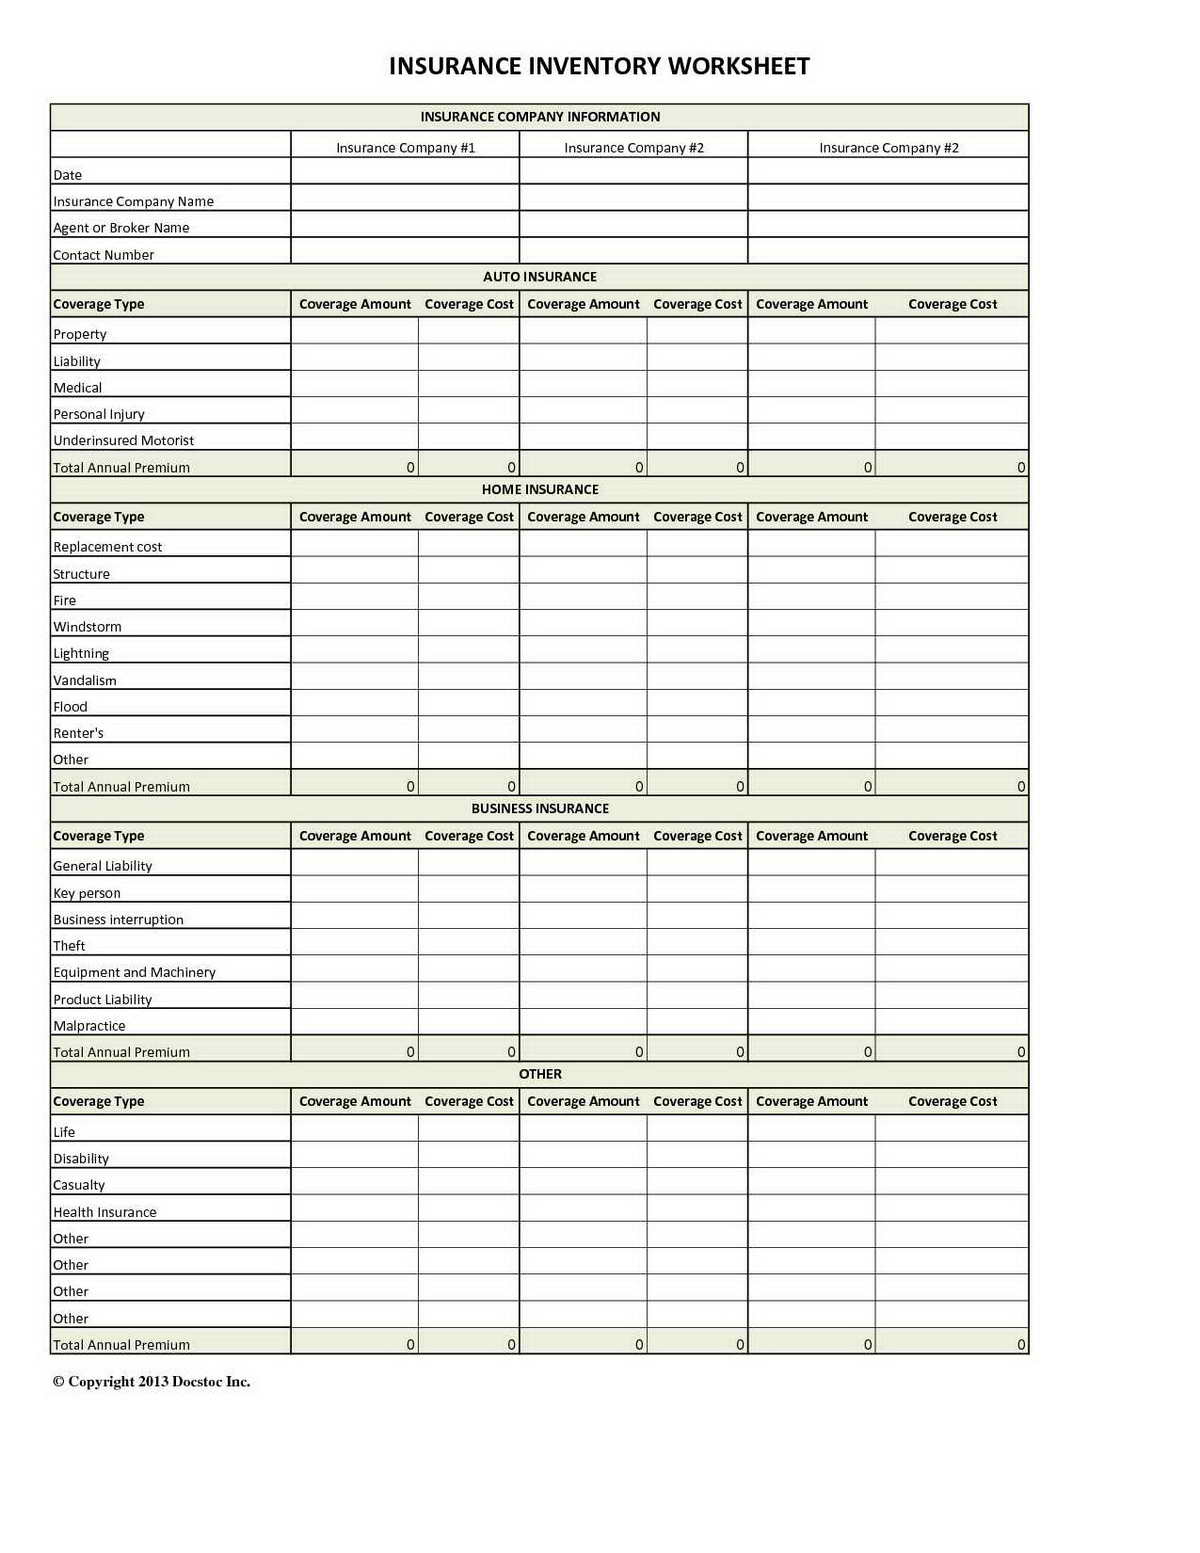 Company Valuation Excel Spreadsheet Within Business Valuation Spreadsheet With Excel Sheet Template Images Home